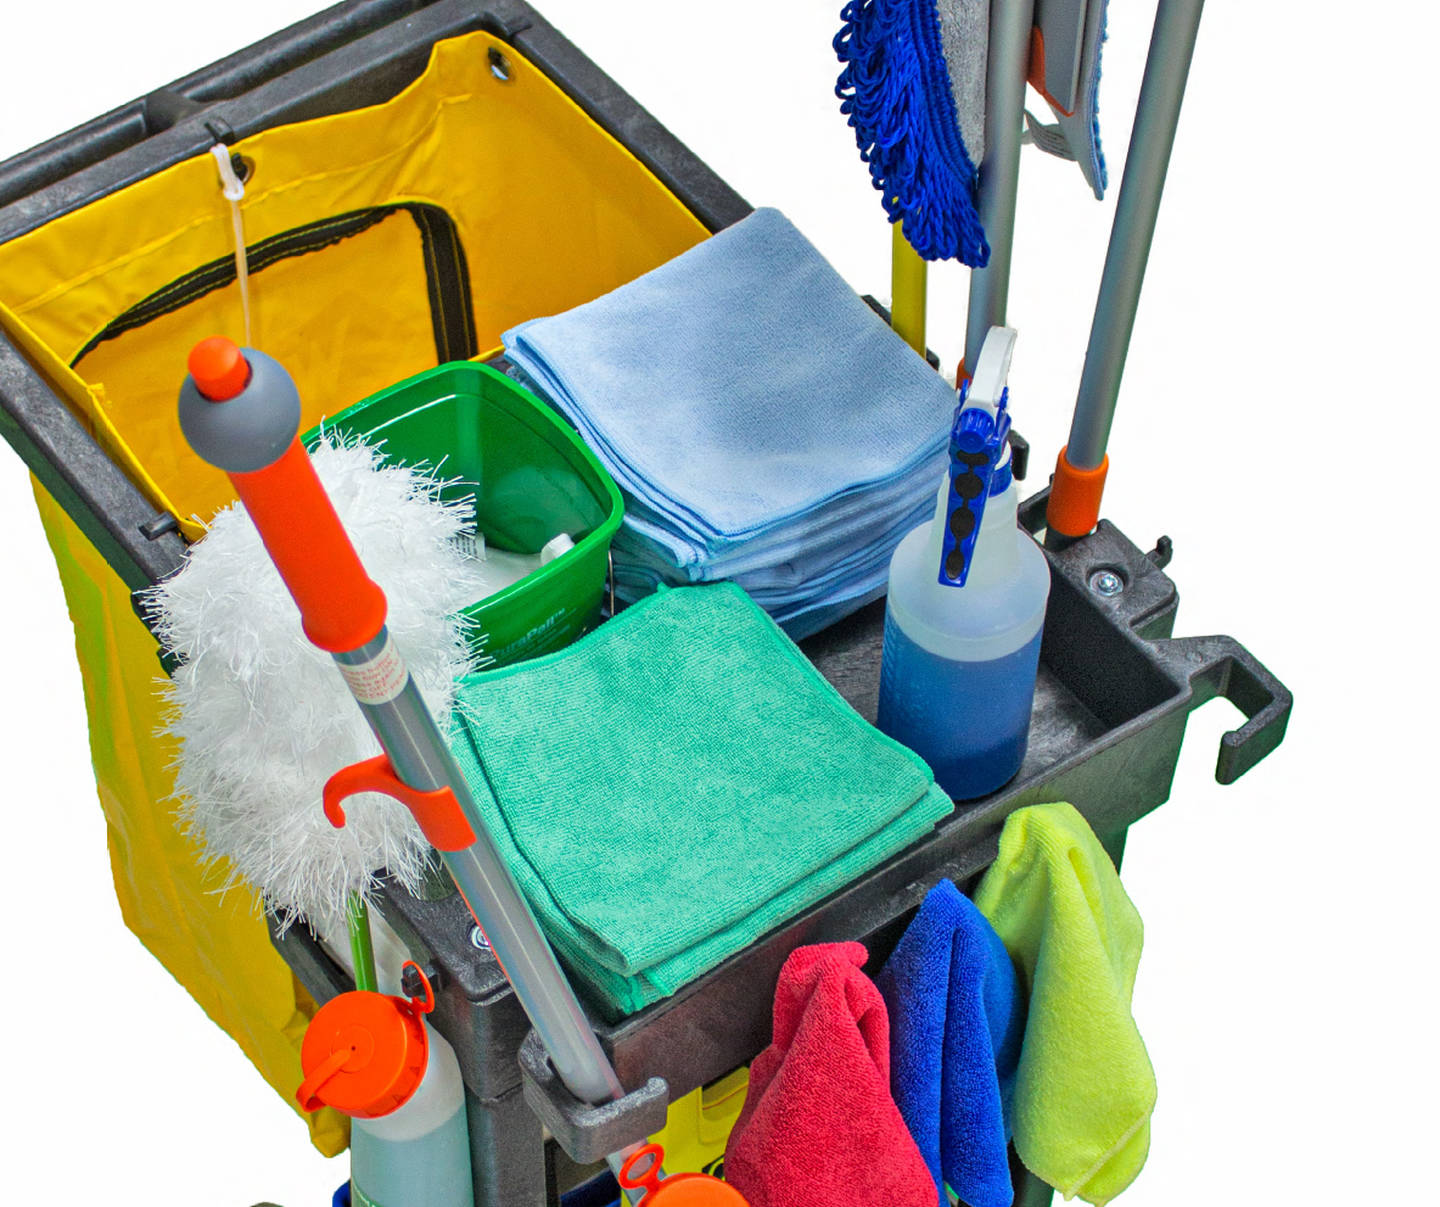 The Mopster Bucketless Mopping System